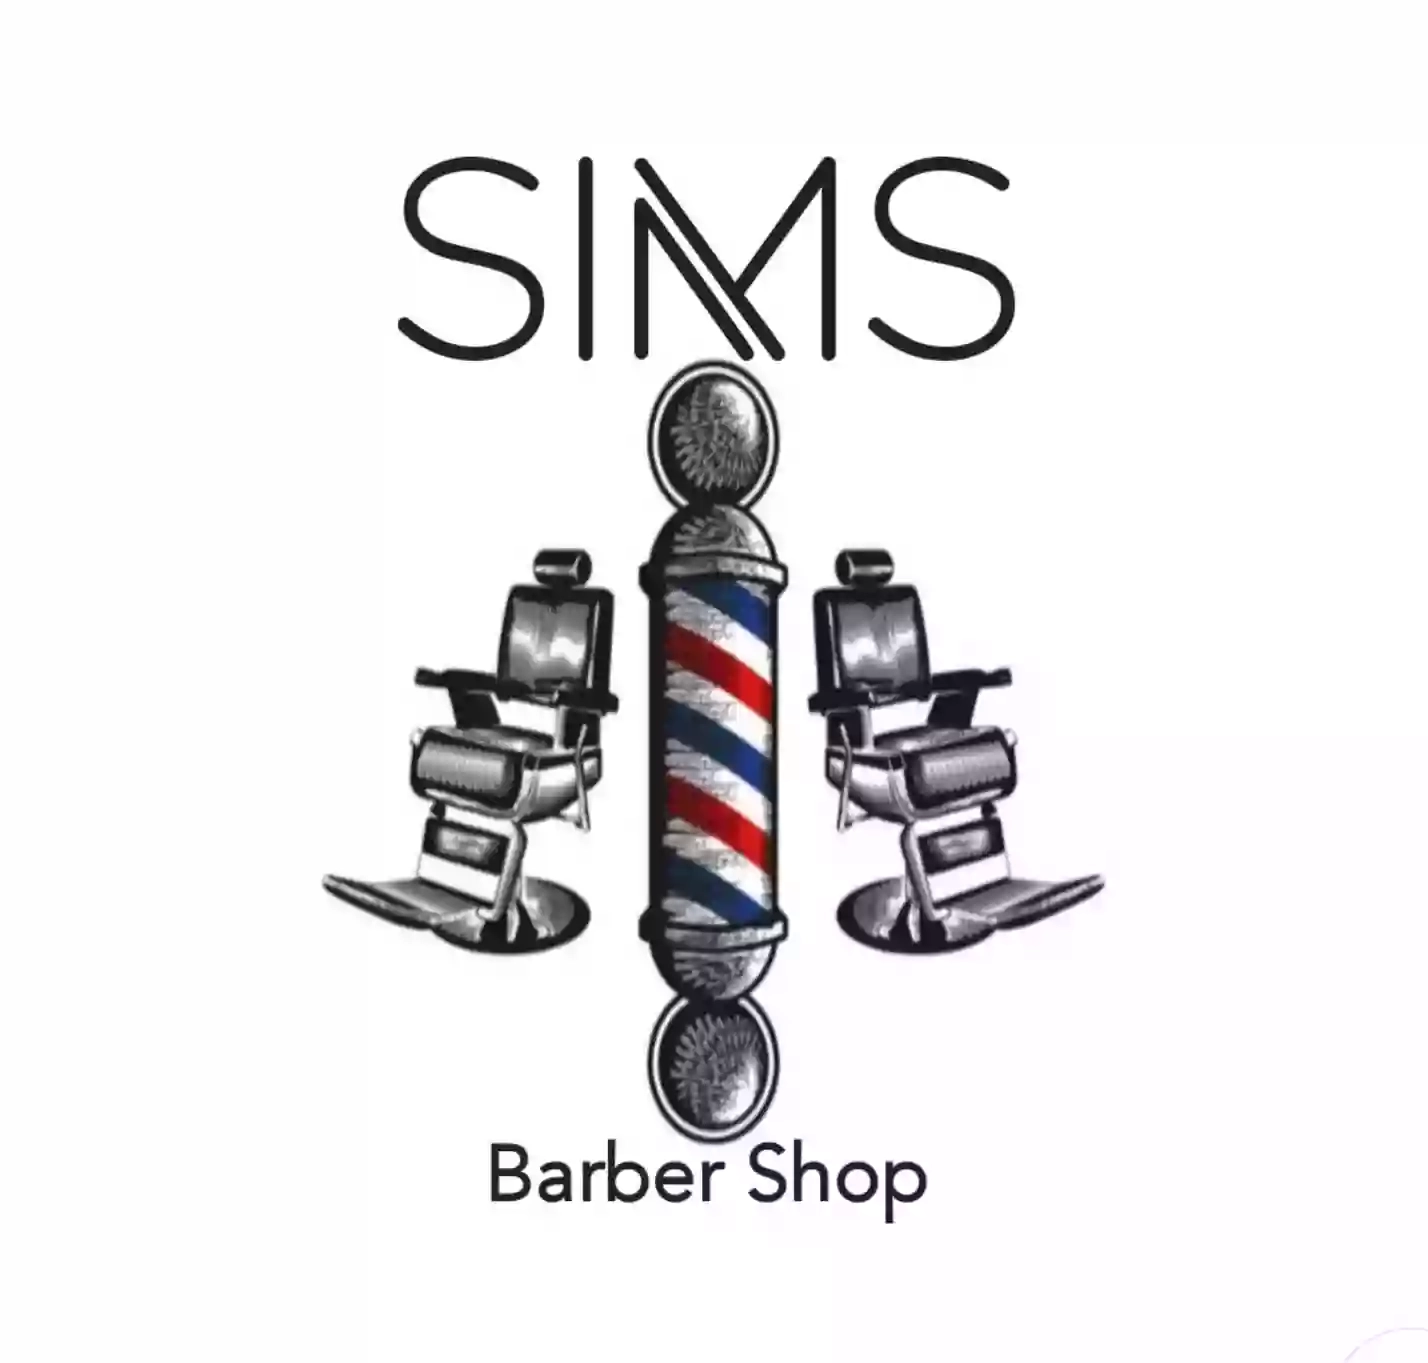 Sims Barber Shop